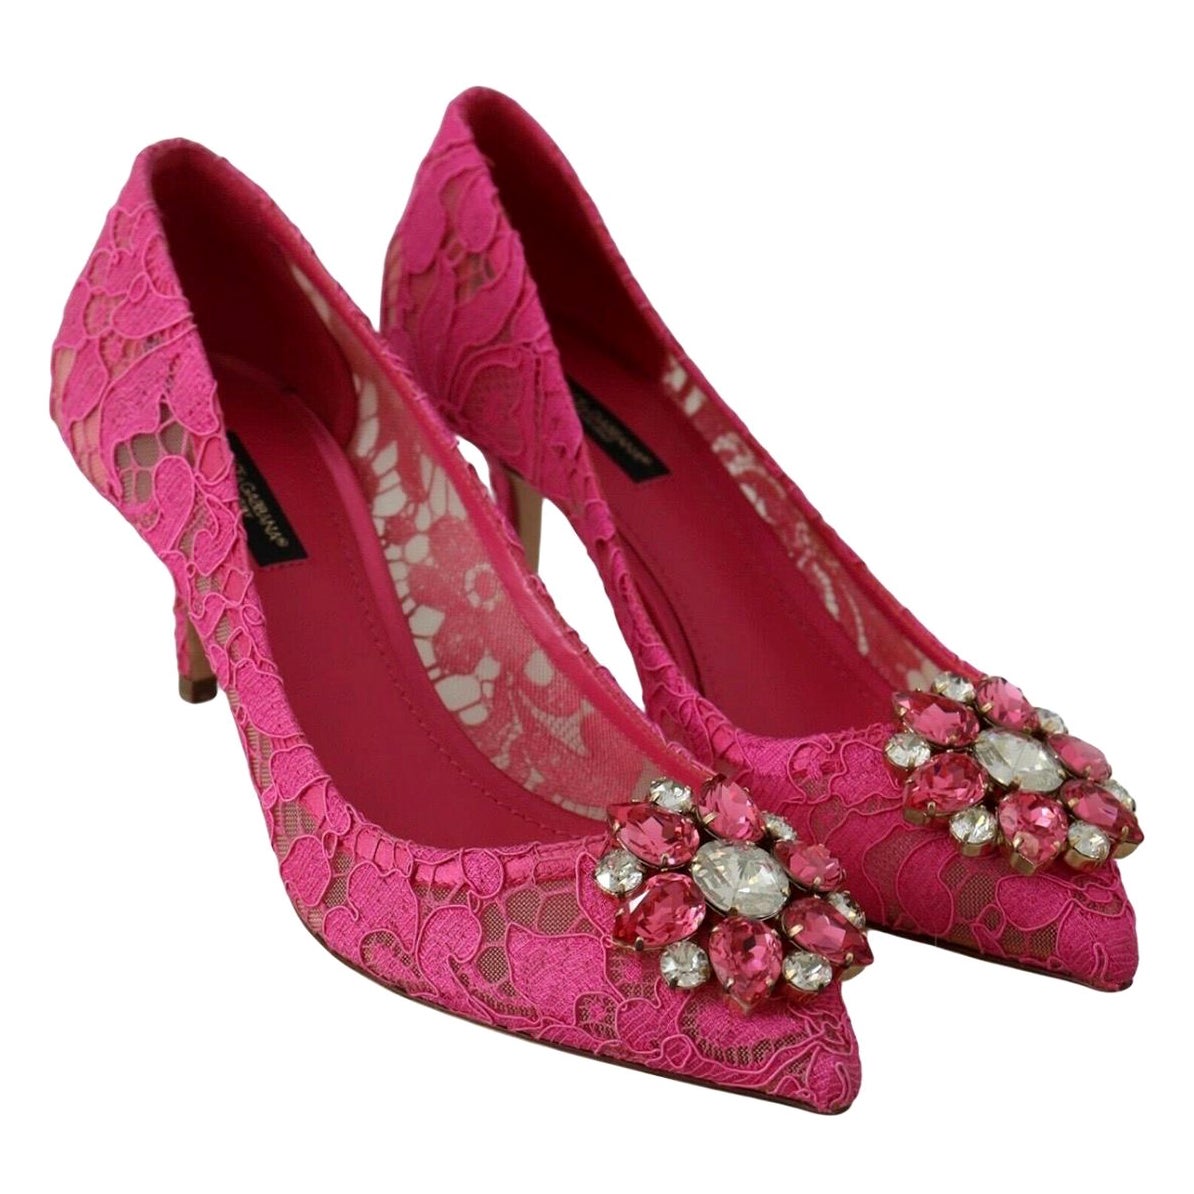 Dolce & Gabbana pink PUMP lace shoes with jewel detail on
the top heels  For Sale